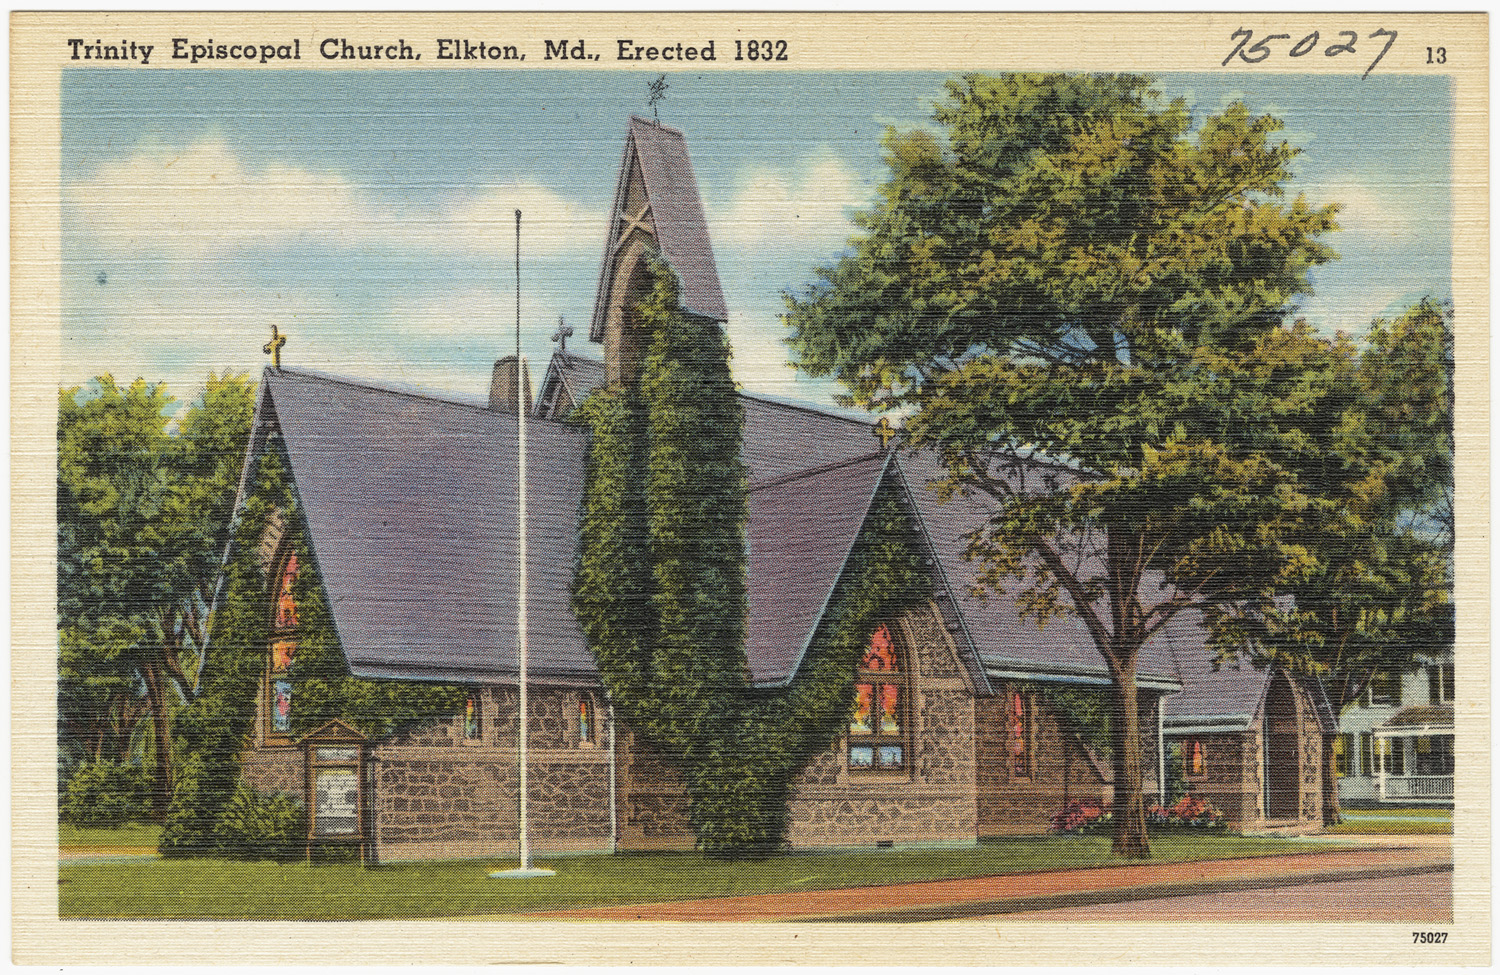 a postcard showing a very old church